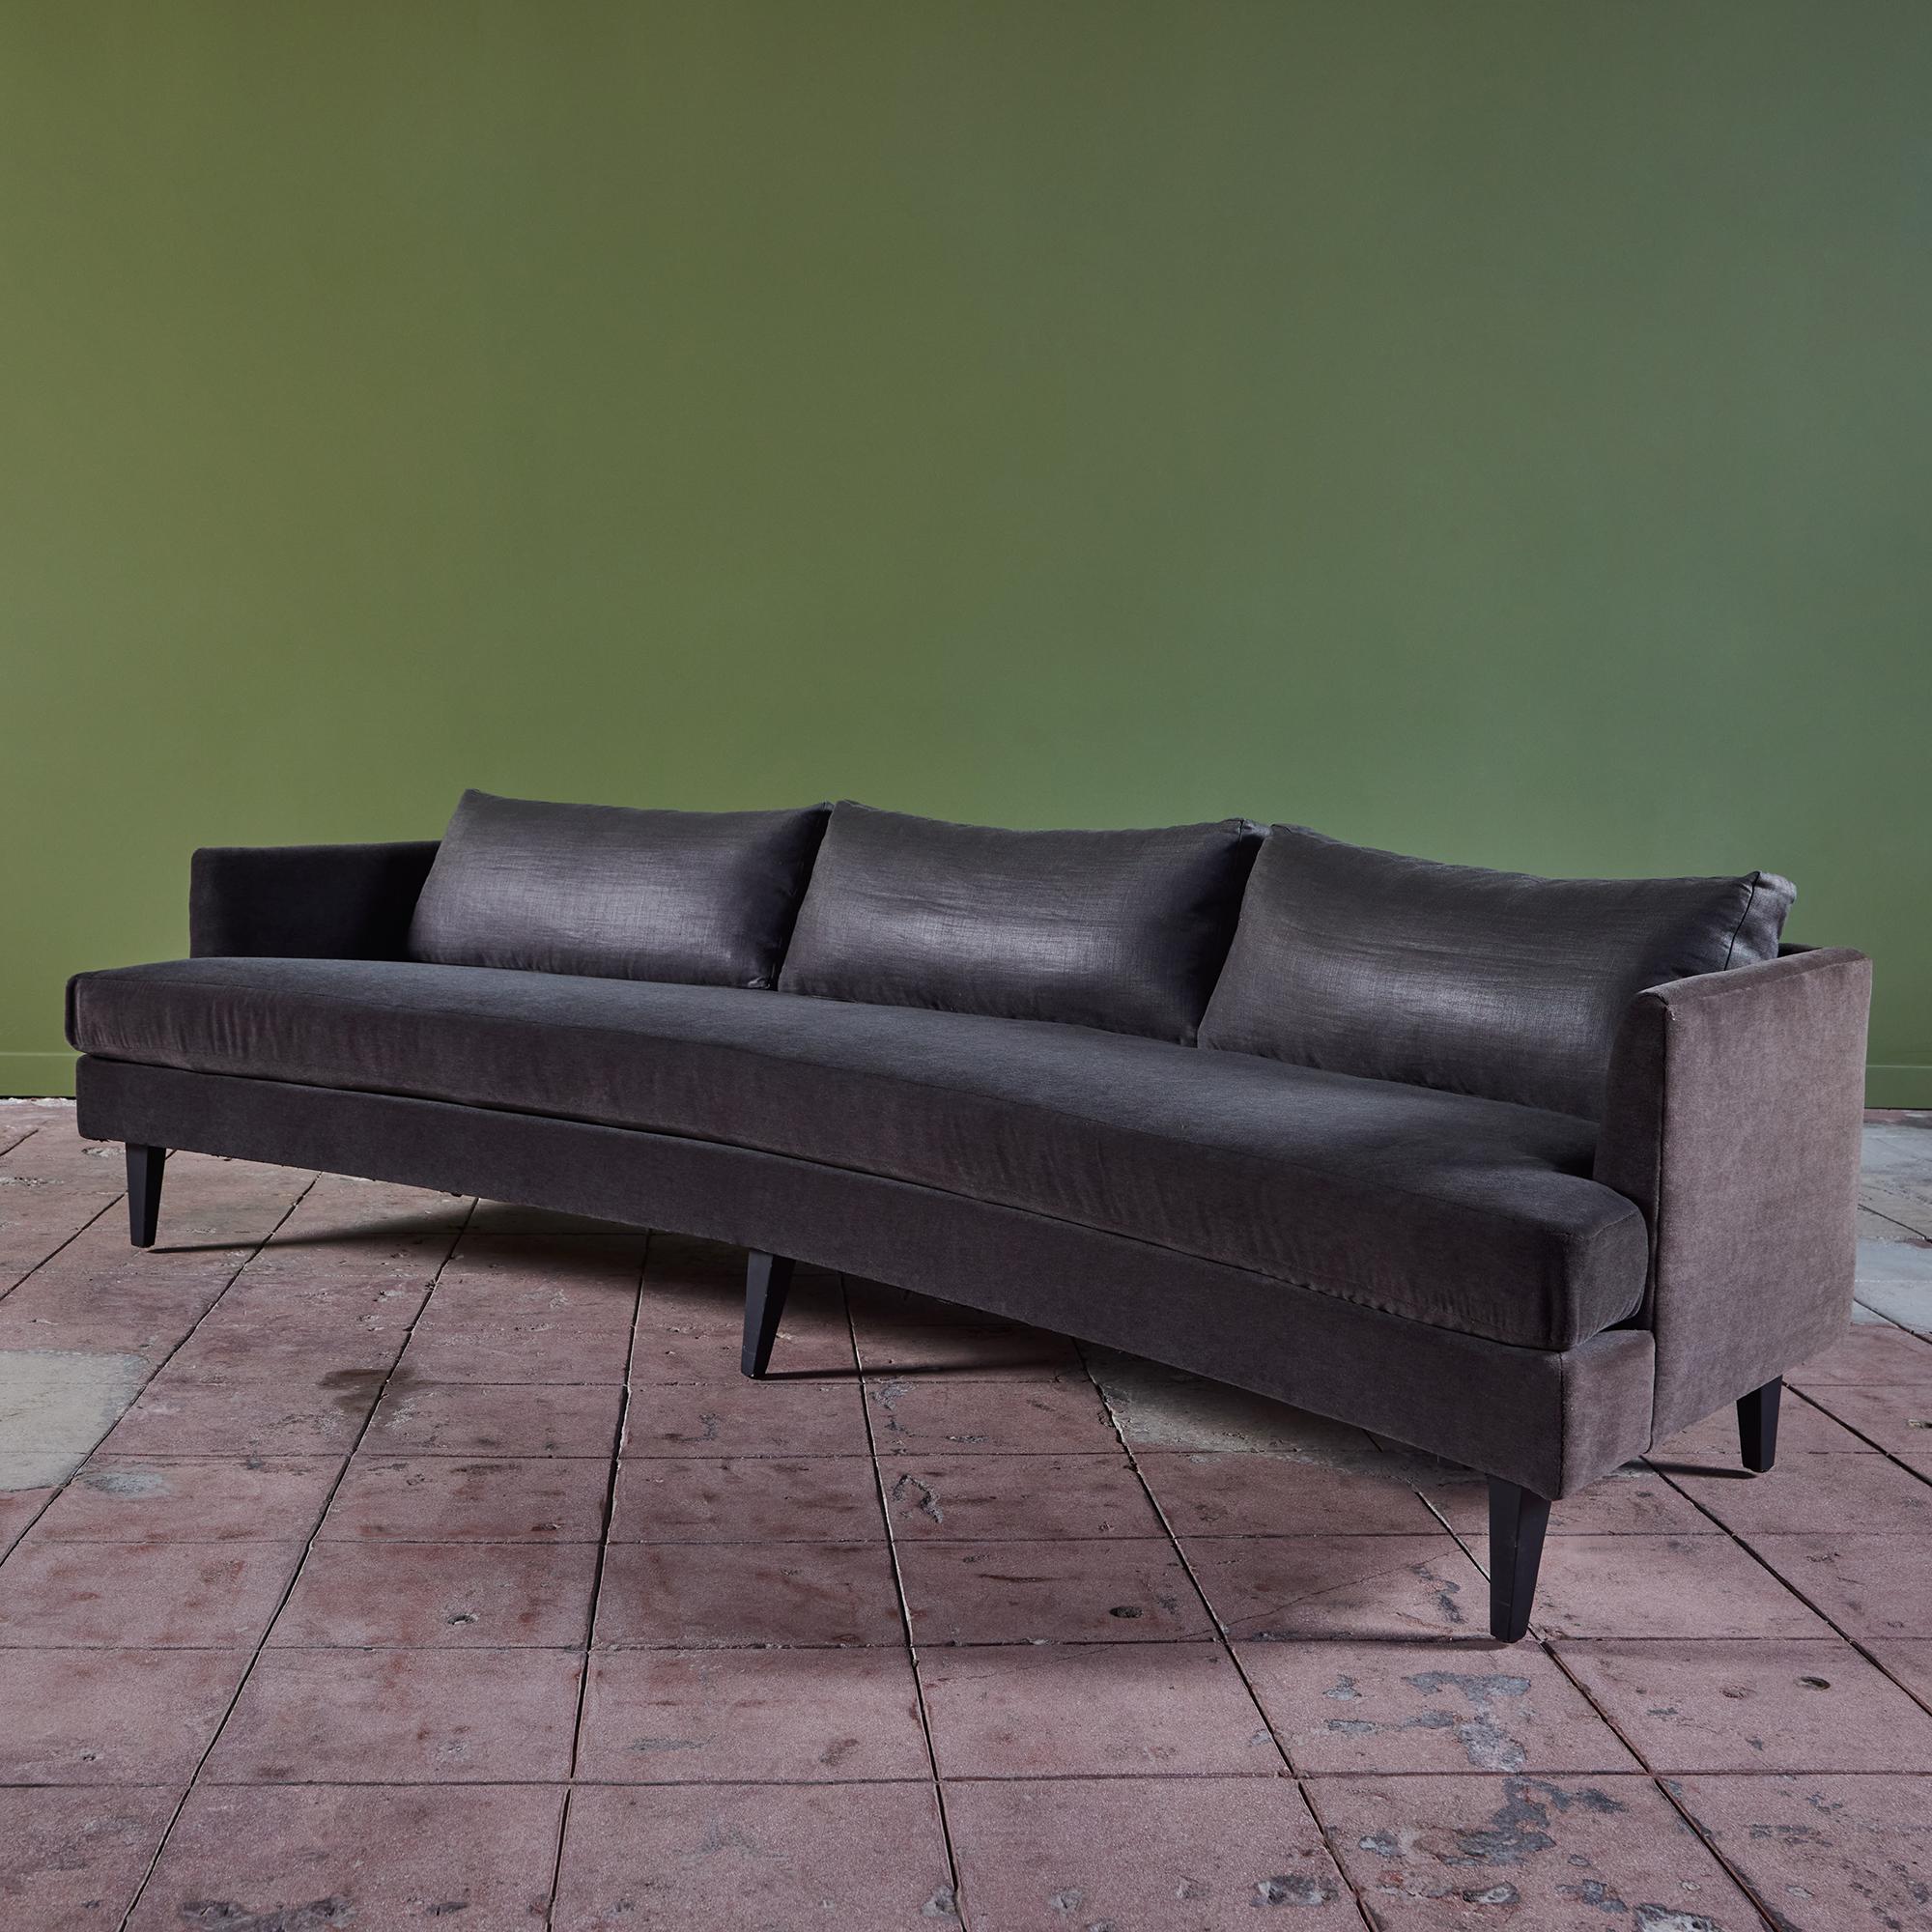 Curved sofa in the style of Dunbar. This sofa features a beautiful dark gray mohair upholstery on the frame and seat. The backrest has three pillows upholstered in a dark gray linen cotton blend, a perfect contrast to the rich mohair. The sofa sits